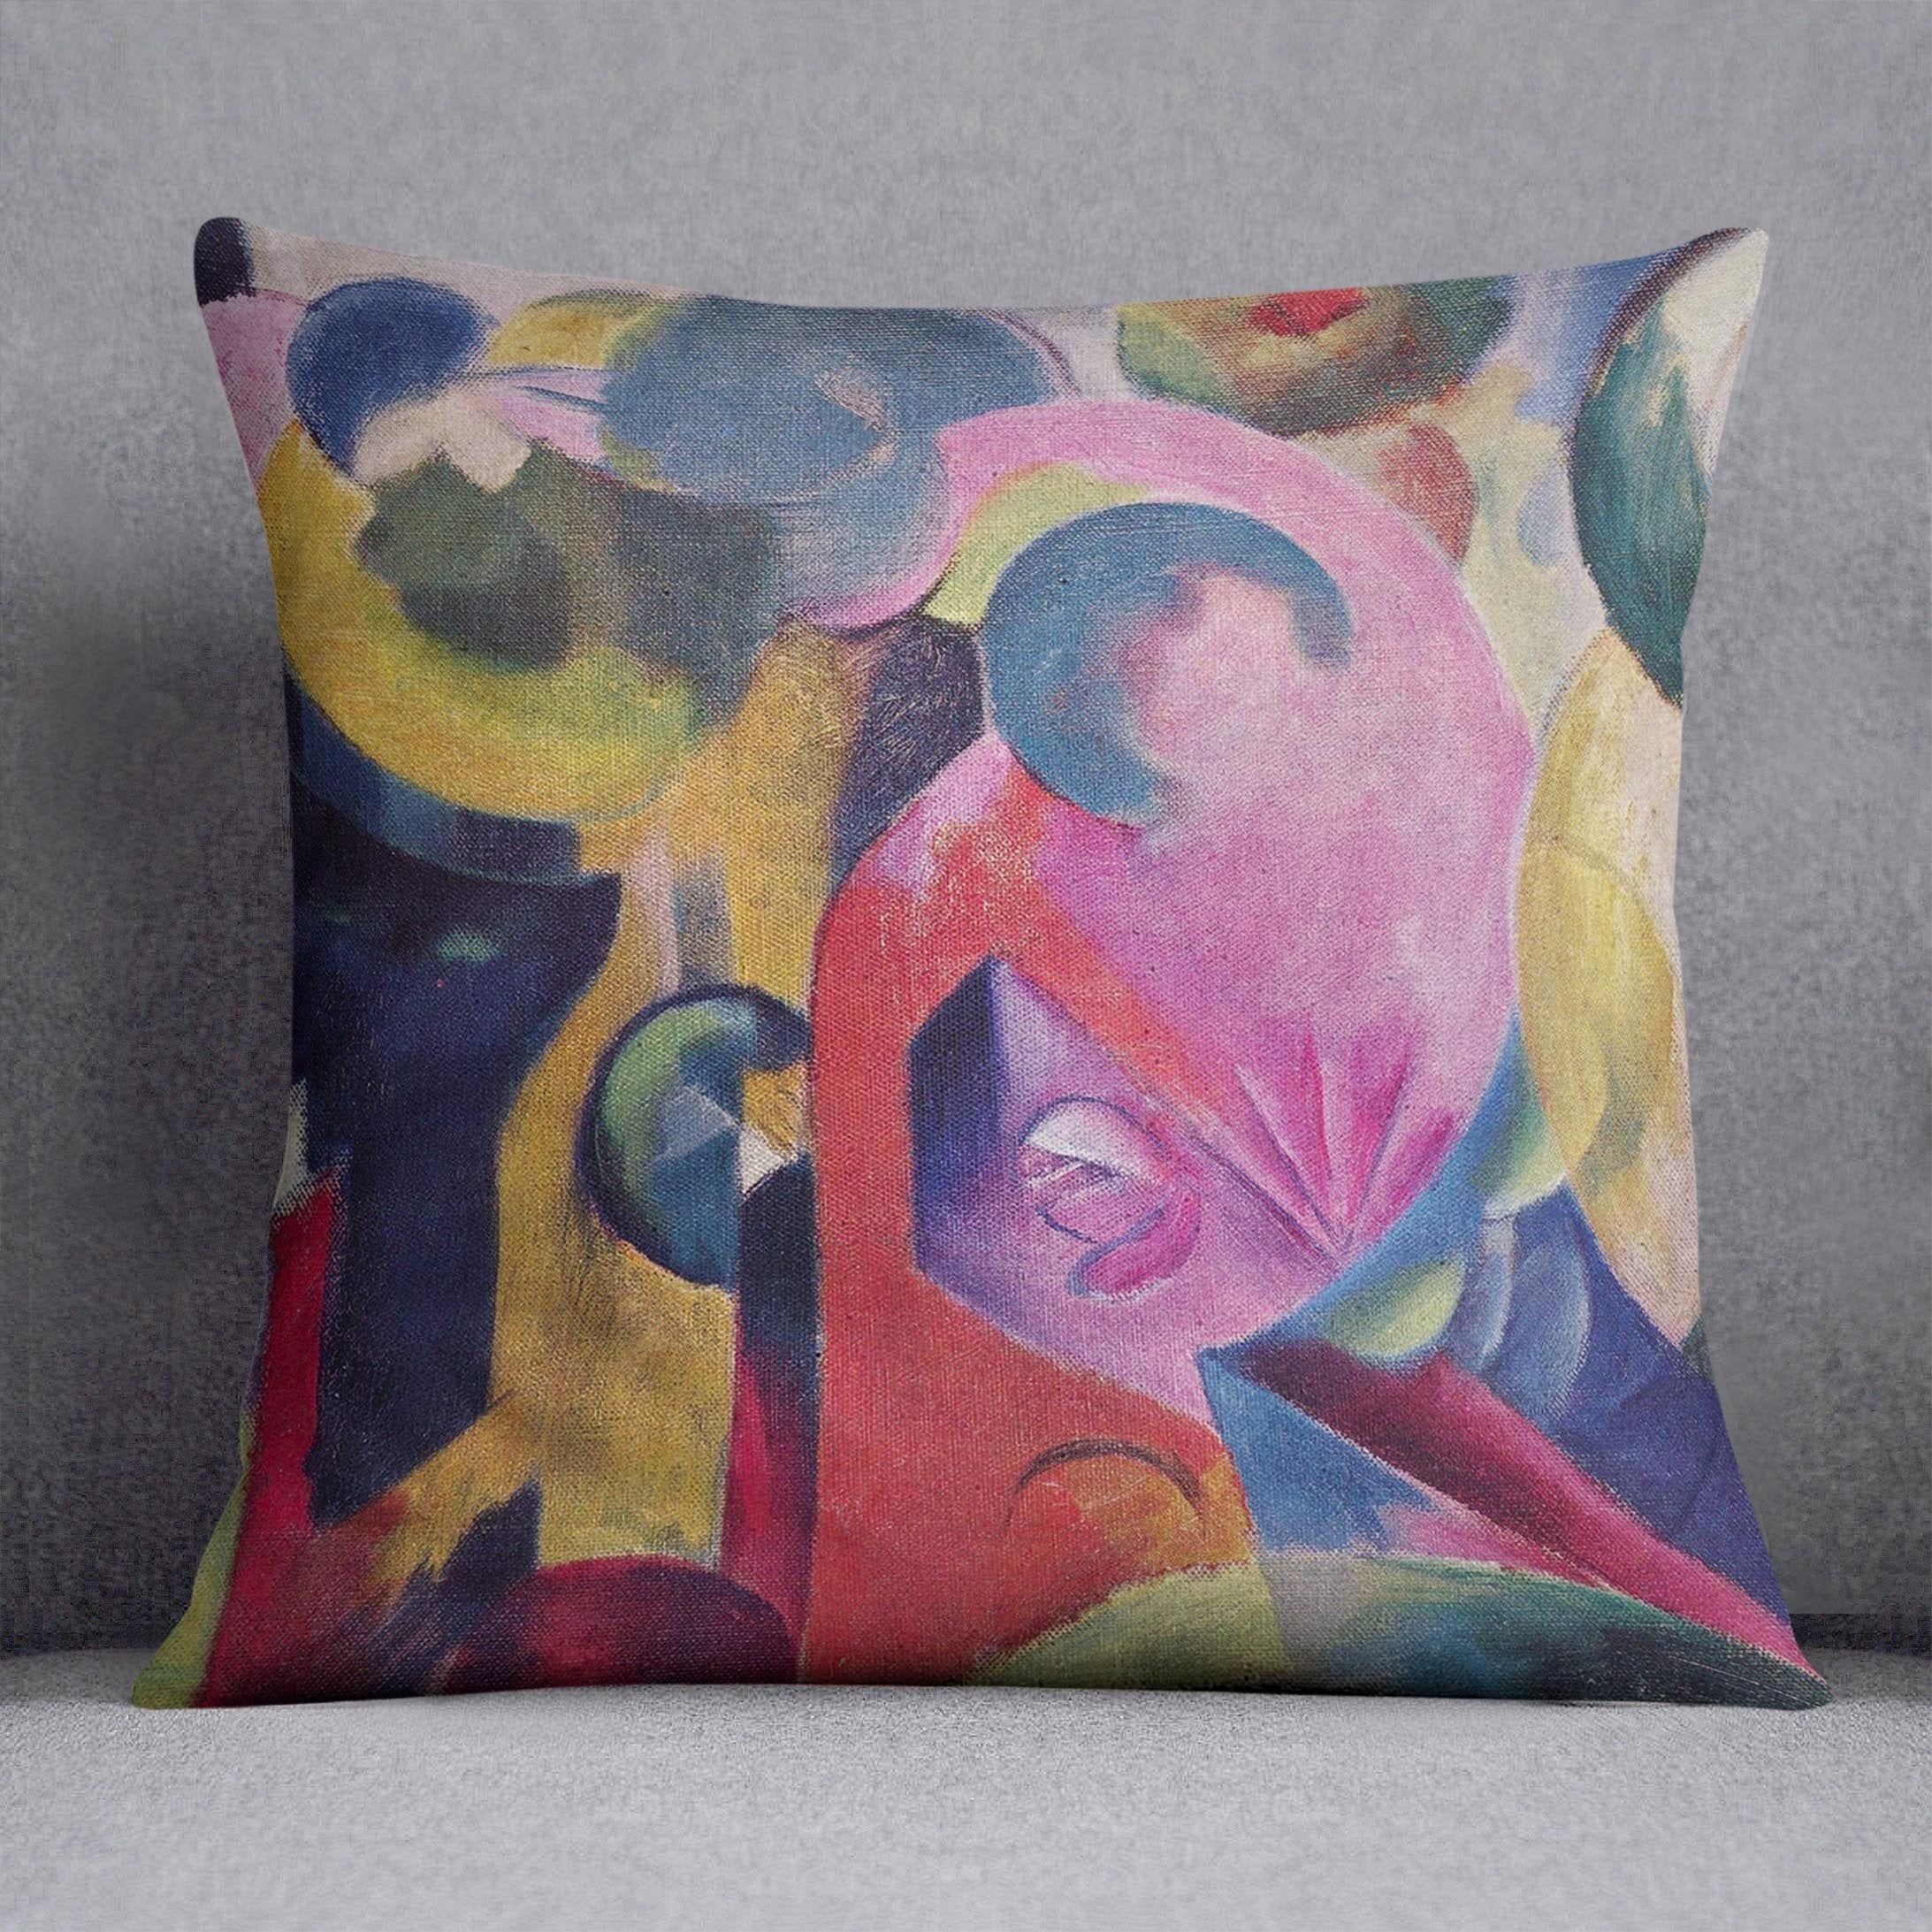 Composition III by Franz Marc Throw Pillow